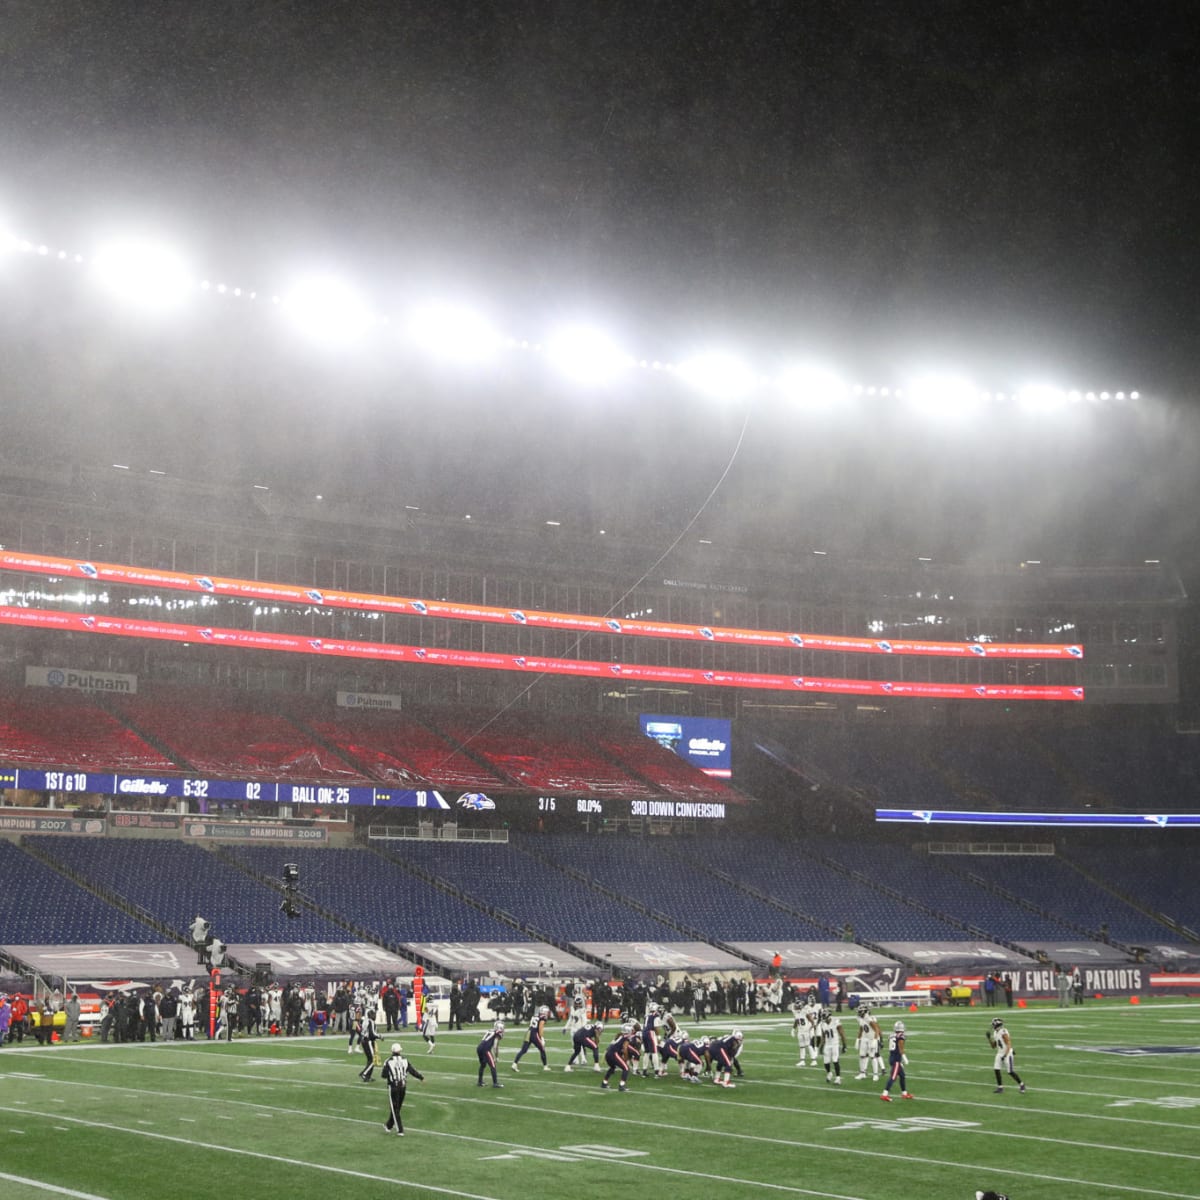 Crazy Photos Of The Rain At Gillette Stadium Are Going Viral - The